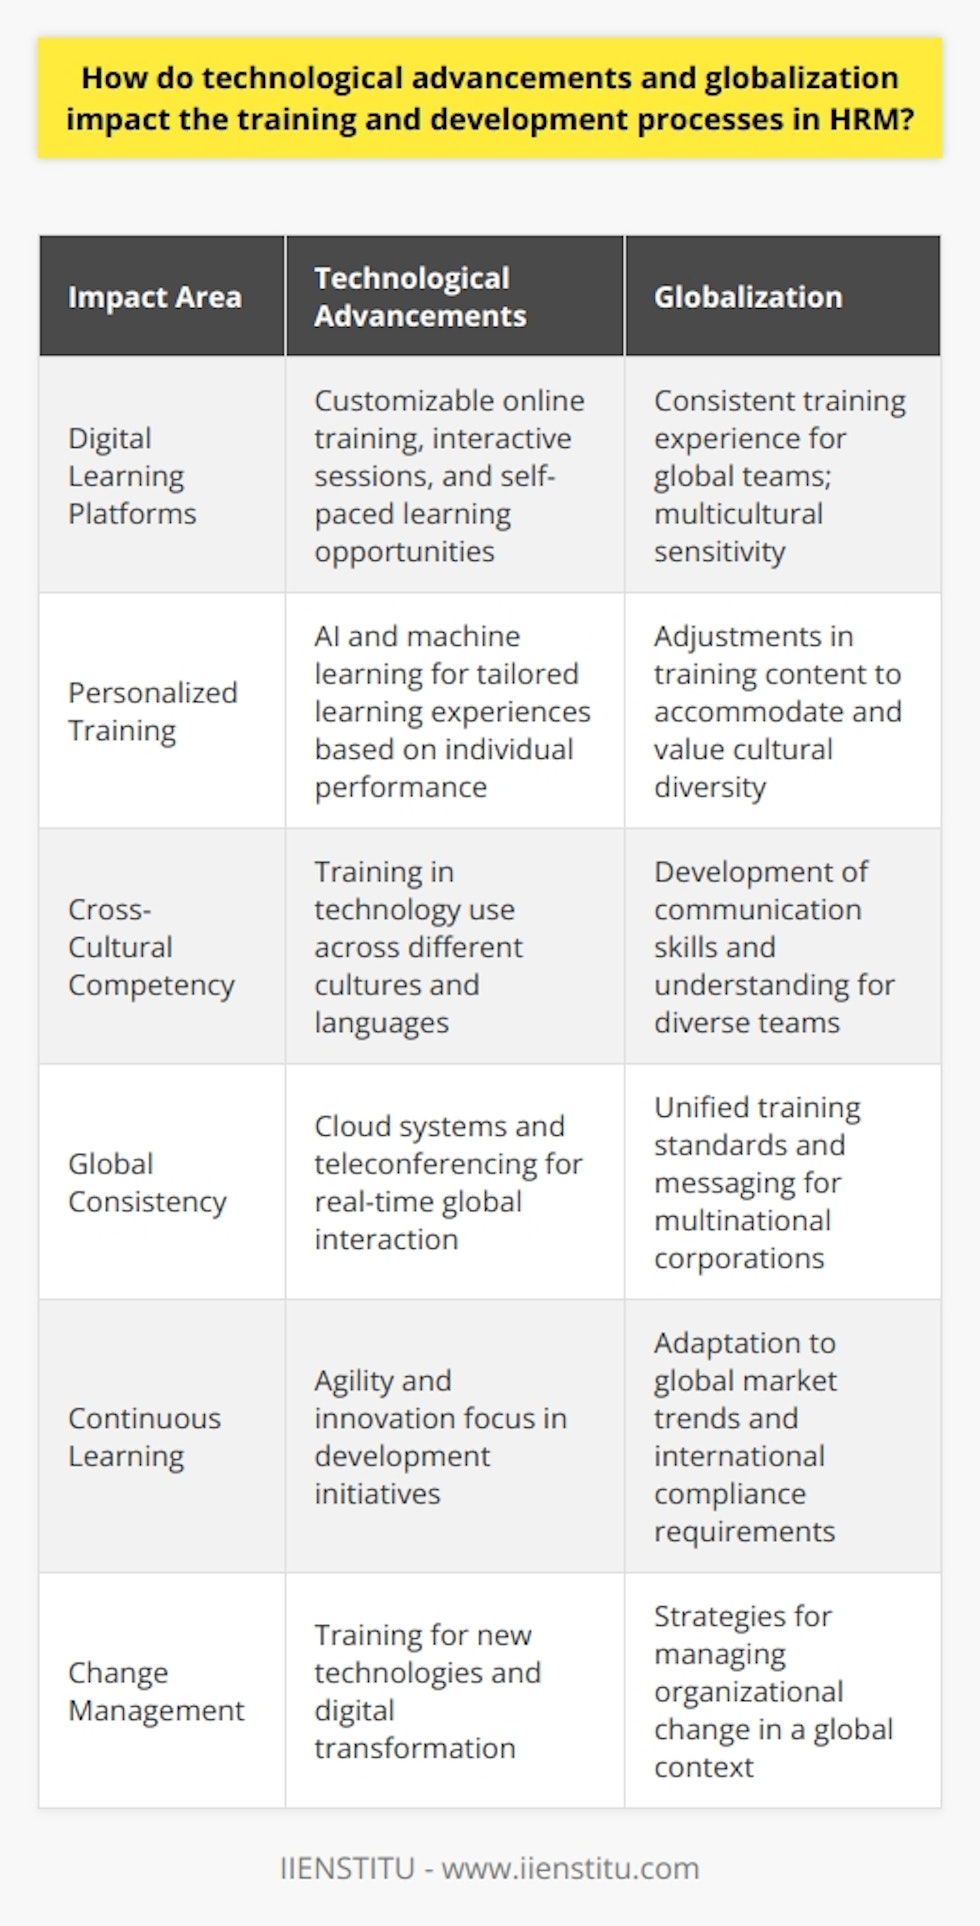 The effects of technological advancements and globalization on HRM training and development processes are profound and transformative. As organizations navigate the complex dynamics of today's business environment, human resource professionals leverage emerging technologies to facilitate ongoing, efficient learning opportunities conducive to a global workforce.The advent of sophisticated digital learning platforms enables HR departments to implement more effective and accessible training programs. Online platforms, such as IIENSTITU, allow for integrated learning experiences with customizable content tailored to the unique needs of each organization and individual employee. With tools that support self-paced learning, real-time feedback, and interactive sessions, these platforms help overcome traditional barriers such as time, location, and pace, which had previously limited the reach and effectiveness of professional development programs.In addition, technologies such as artificial intelligence and machine learning provide unprecedented capabilities for personalizing training and development. These intelligent systems can analyze an individual's learning habits and performance, adjusting the training curriculum to their strengths and areas for improvement, offering a more personalized learning journey.Globalization has expanded the horizons for HRM, bringing a wealth of cultural diversity to the workplace. This shift necessitates training programs that are not only cognizant of cultural differences but are also designed to bridge gaps and facilitate inclusive collaboration. HR professionals must now focus on creating development programs that cultivate cross-cultural competencies and promote an inclusive atmosphere that values and integrates diverse perspectives.Furthermore, multinational corporations face the challenge of maintaining a cohesive training narrative across international borders. New technologies mitigate these challenges by providing scalable solutions that support the delivery of consistent training materials and messaging. Cloud-based systems, teleconferencing, and other digital communication tools allow for real-time interactions and shared learning experiences for employees spread across the globe.The fast-paced evolution of technology also brings the need for continuous upskilling and reskilling. Organizations must stay ahead of industry trends and technological advancements to remain competitive. HR professionals are tasked with designing forward-thinking training initiatives that emphasize agility and innovation, ensuring that the workforce is prepared to meet the demands of an ever-changing market landscape.In a world where change is the only constant, the roles of HR and training professionals have expanded to include change management, technological literacy, and a global mindset. These responsibilities underscore the importance of a proactive approach to employee development—one that takes into account the cultural, technological, and market forces at play.In sum, the impacts of technological advancements and globalization on HRM training and development processes are integral to the modern business model. By embracing digital learning platforms, accounting for multicultural dimensions, ensuring consistent global training standards, and fostering a culture of lifelong learning, HR departments play a key role in building agile, informed, and competent workforces equipped to thrive in a global, technologically advanced society.